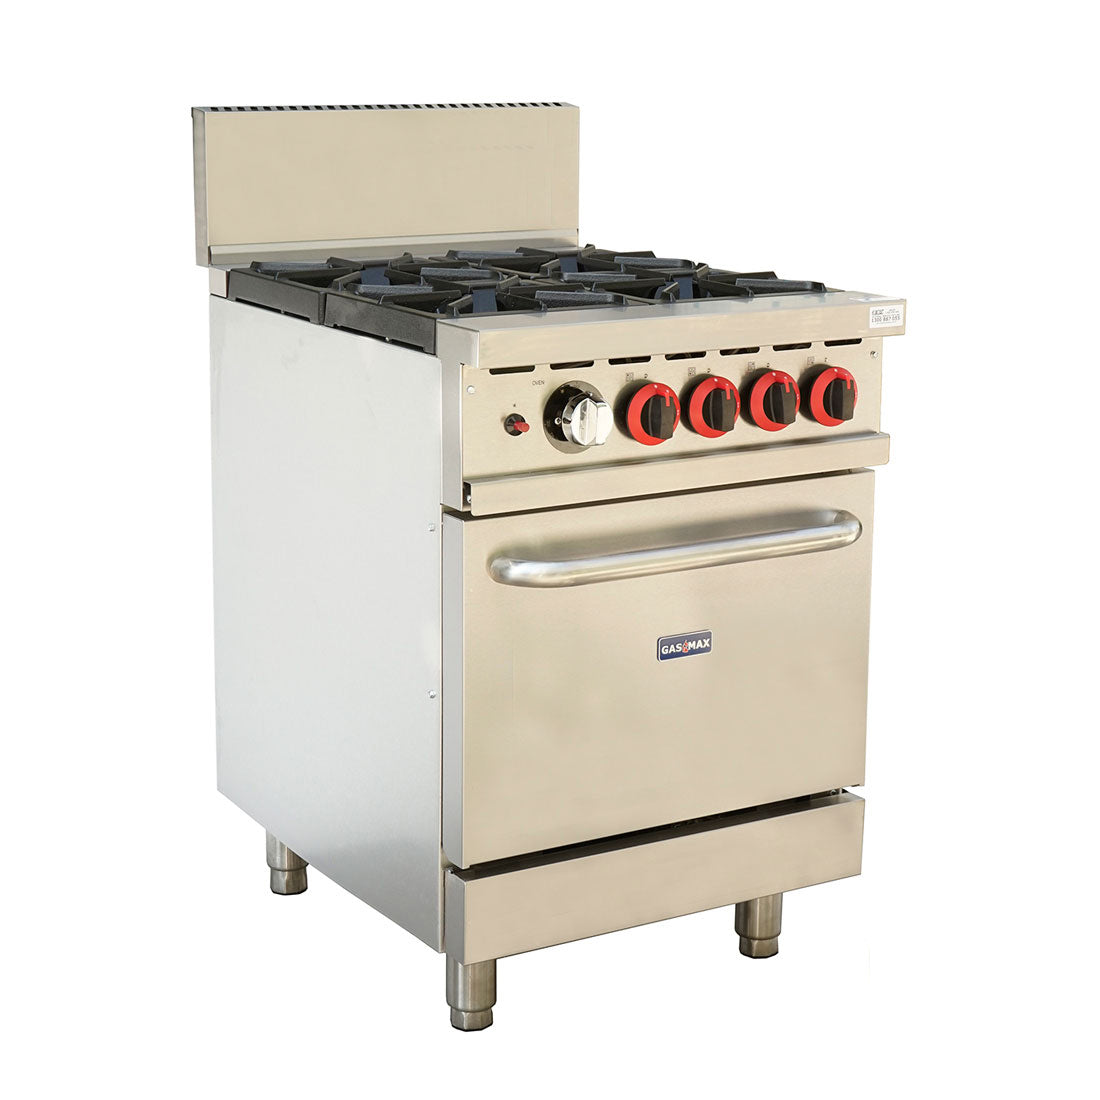 Gasmax 4 Burner With Oven Flame Failure GBS4TS